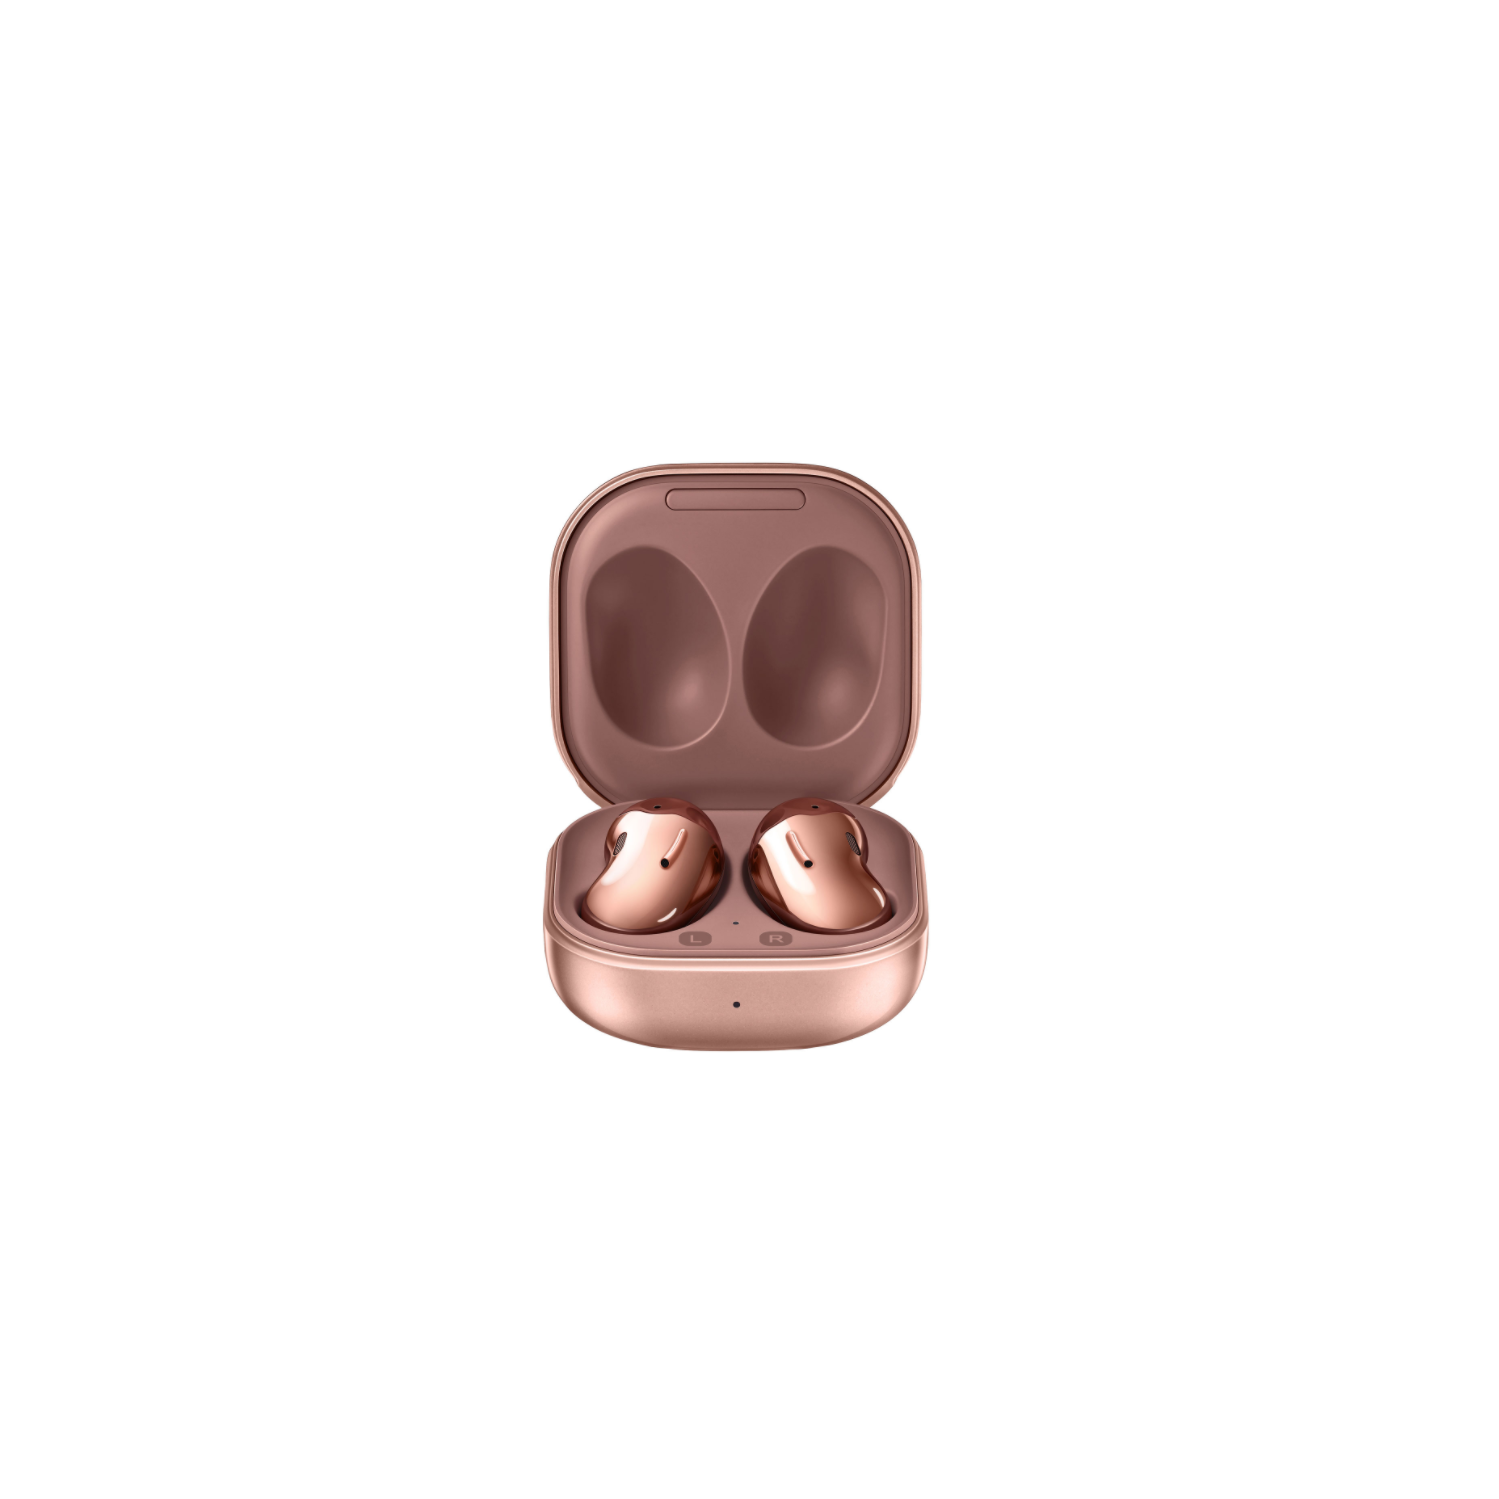 Samsung Galaxy (Mystic Bronze) Buds Live In-Ear Noise Cancelling True Wireless Earbuds